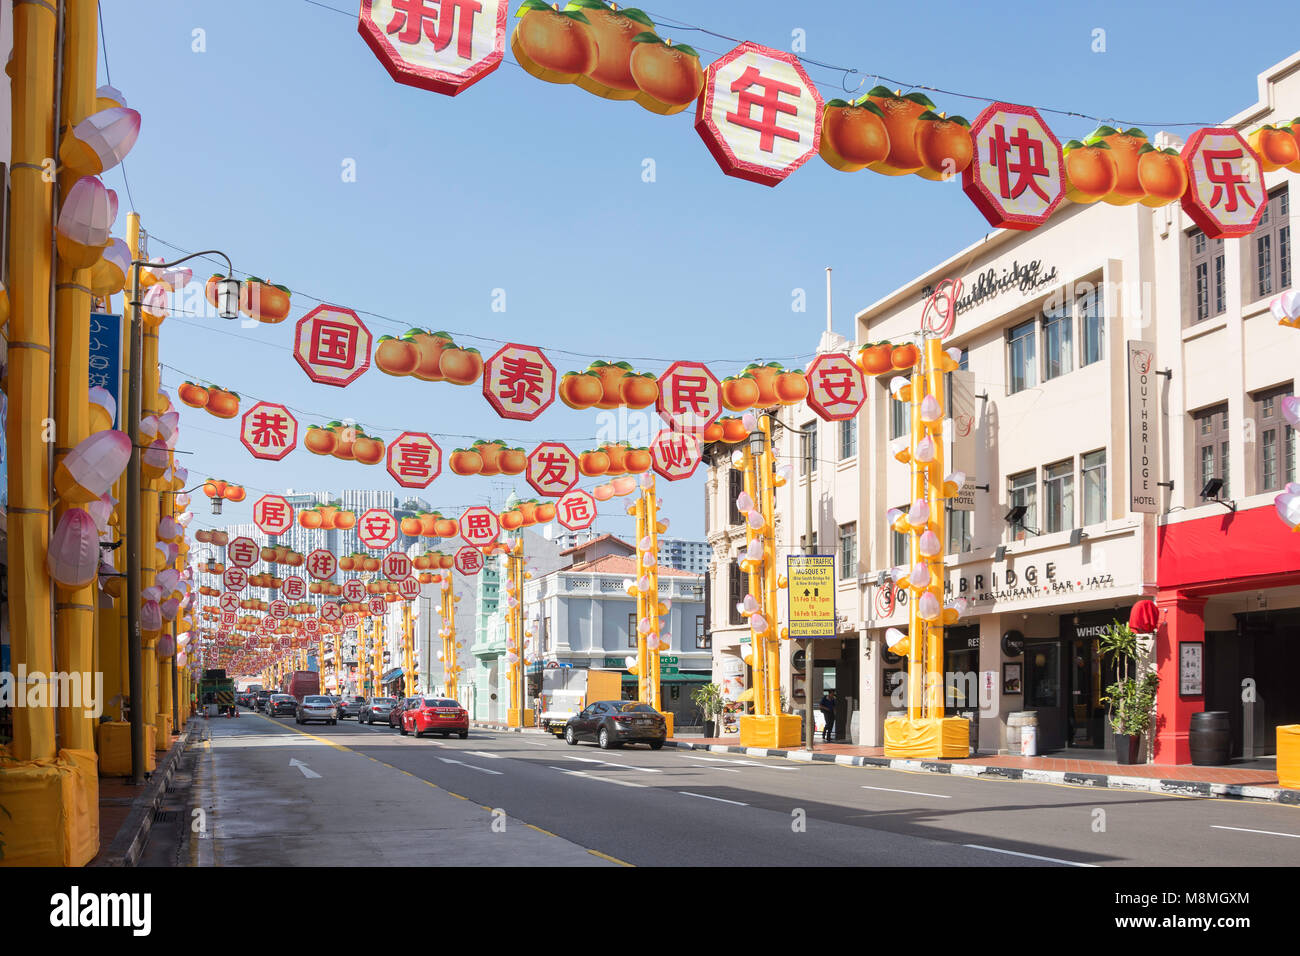 Chinese New Year decorations on South Bridge Road, Chinatown, Outram District, Central Area, Singapore Island (Pulau Ujong), Singapore Stock Photo